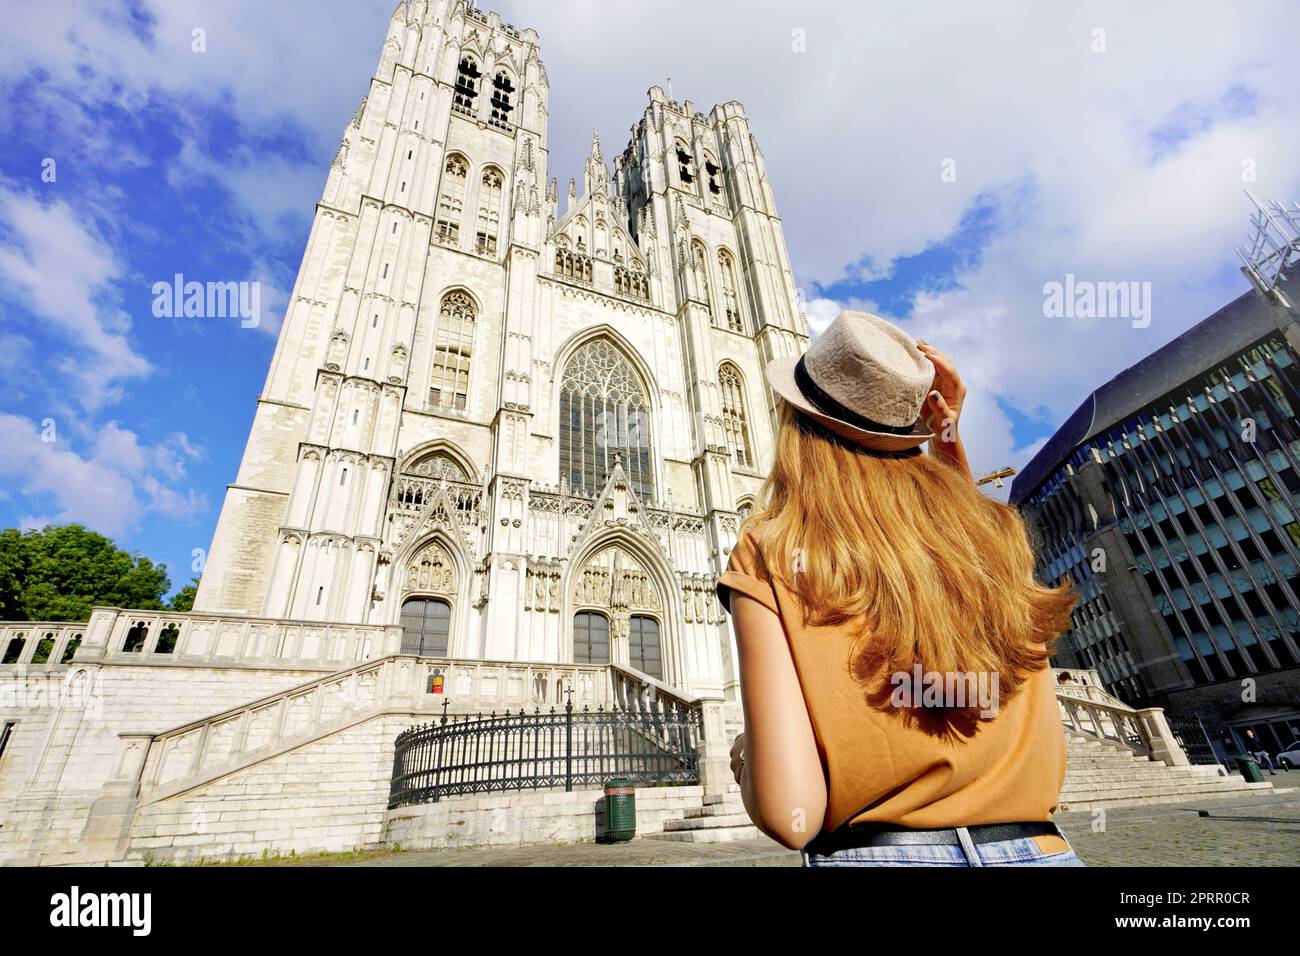 Tourism in Brussels. Back view of tourist girl visiting Brussels Cathedral, Belgium, Europe. Stock Photo